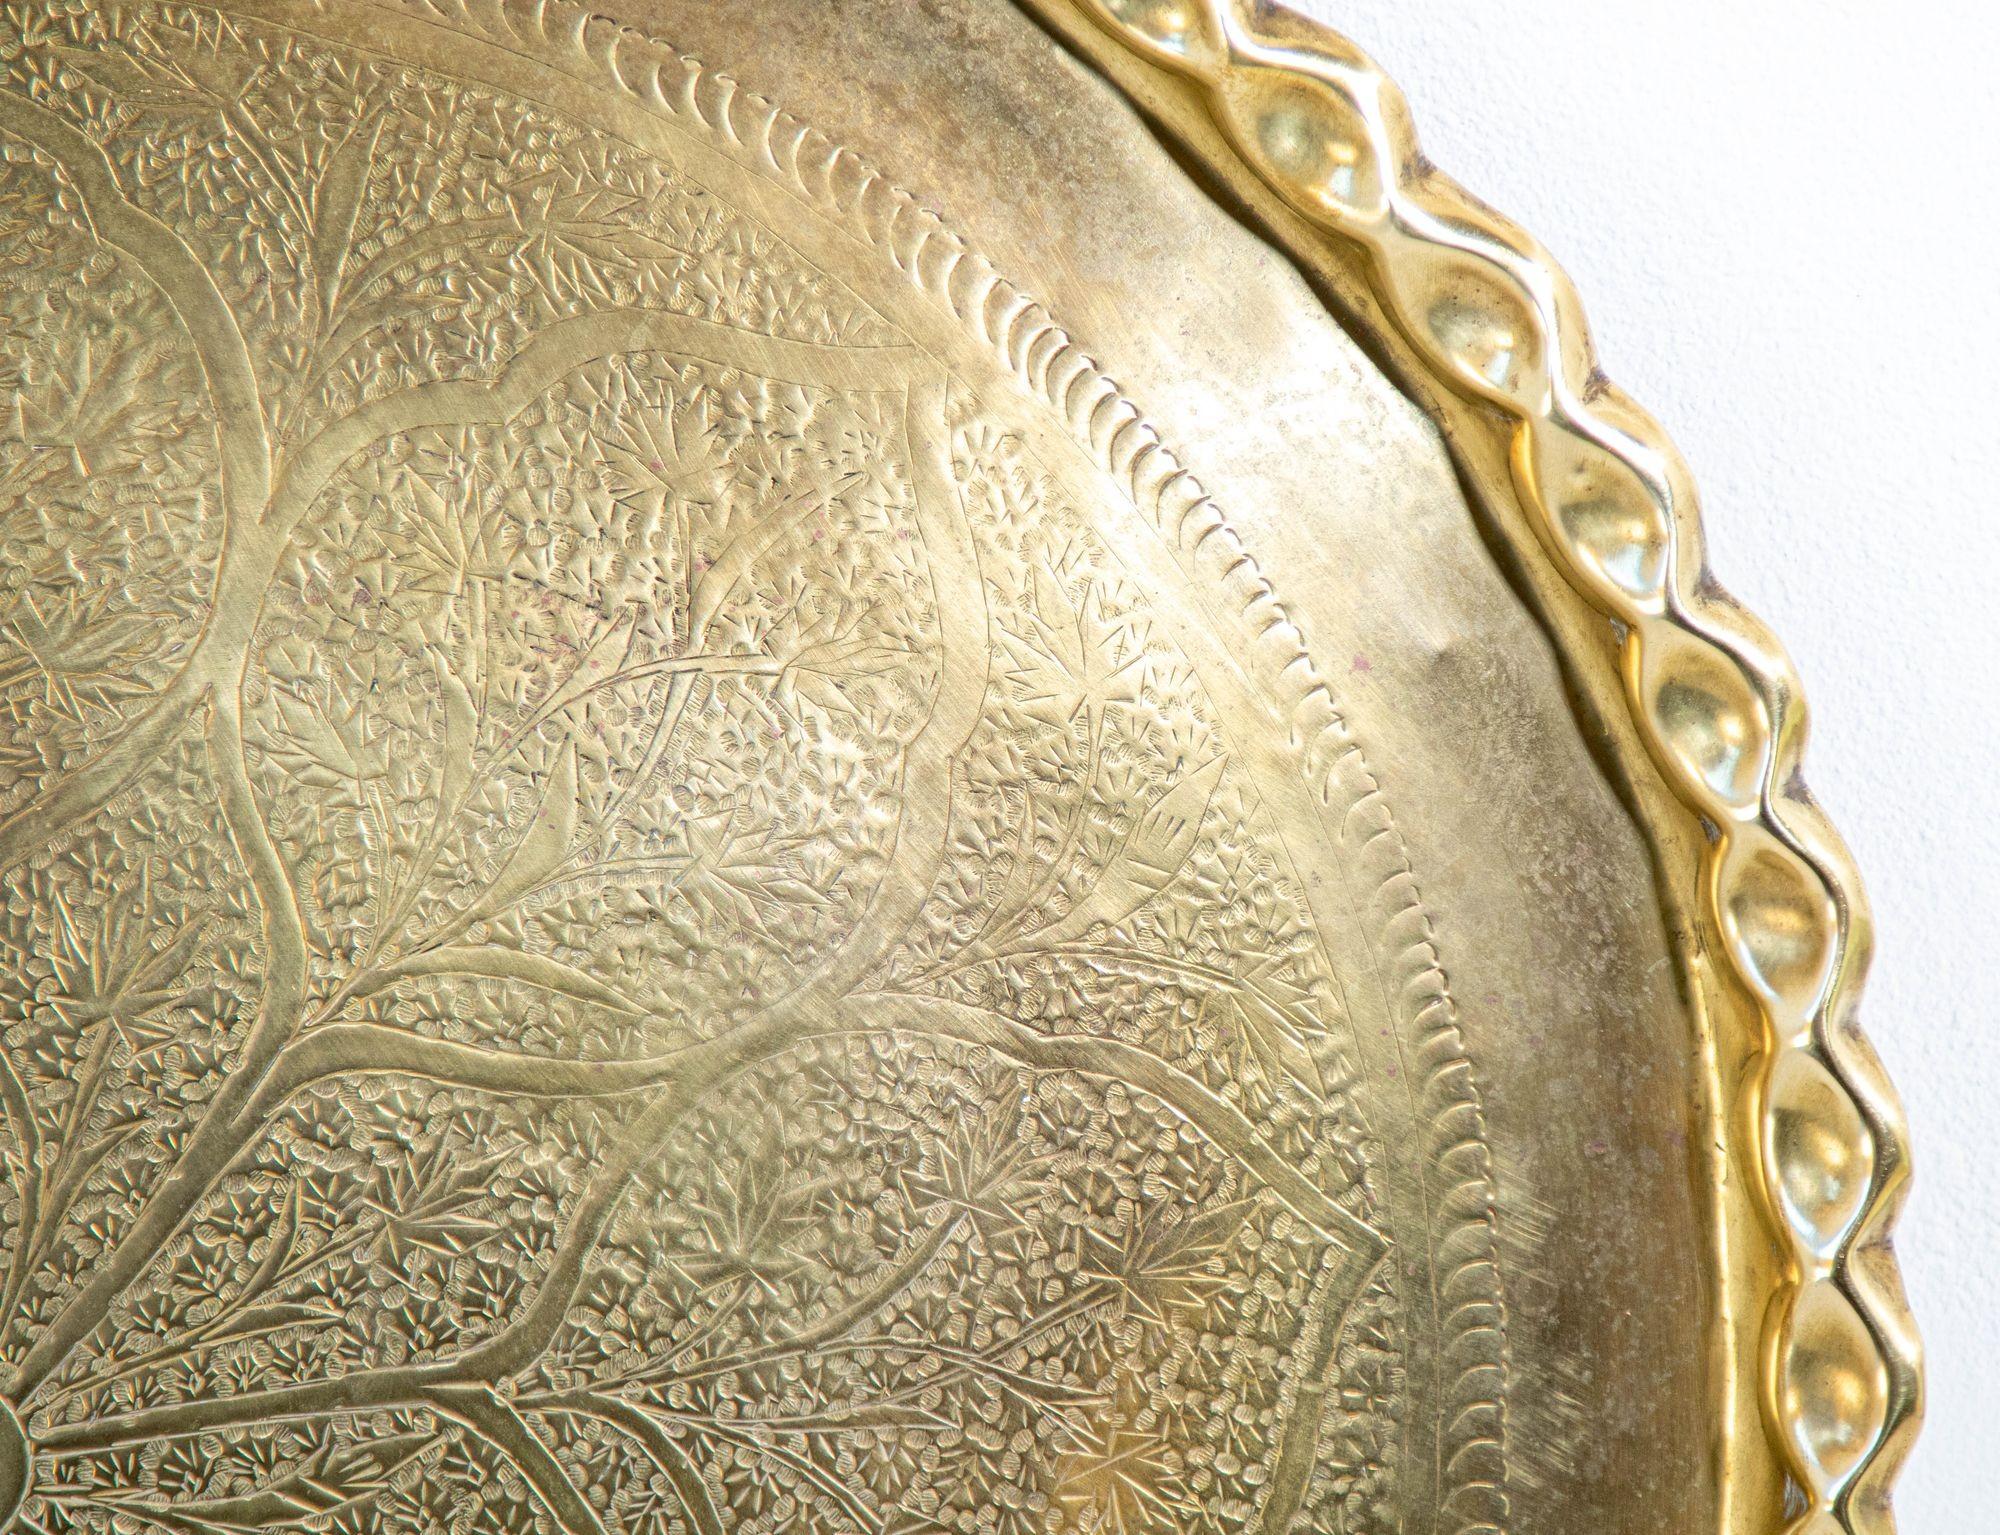 Asian Mughal Rajasthani Large Polished Round Brass Tray with Crest Edges 30 in. For Sale 4